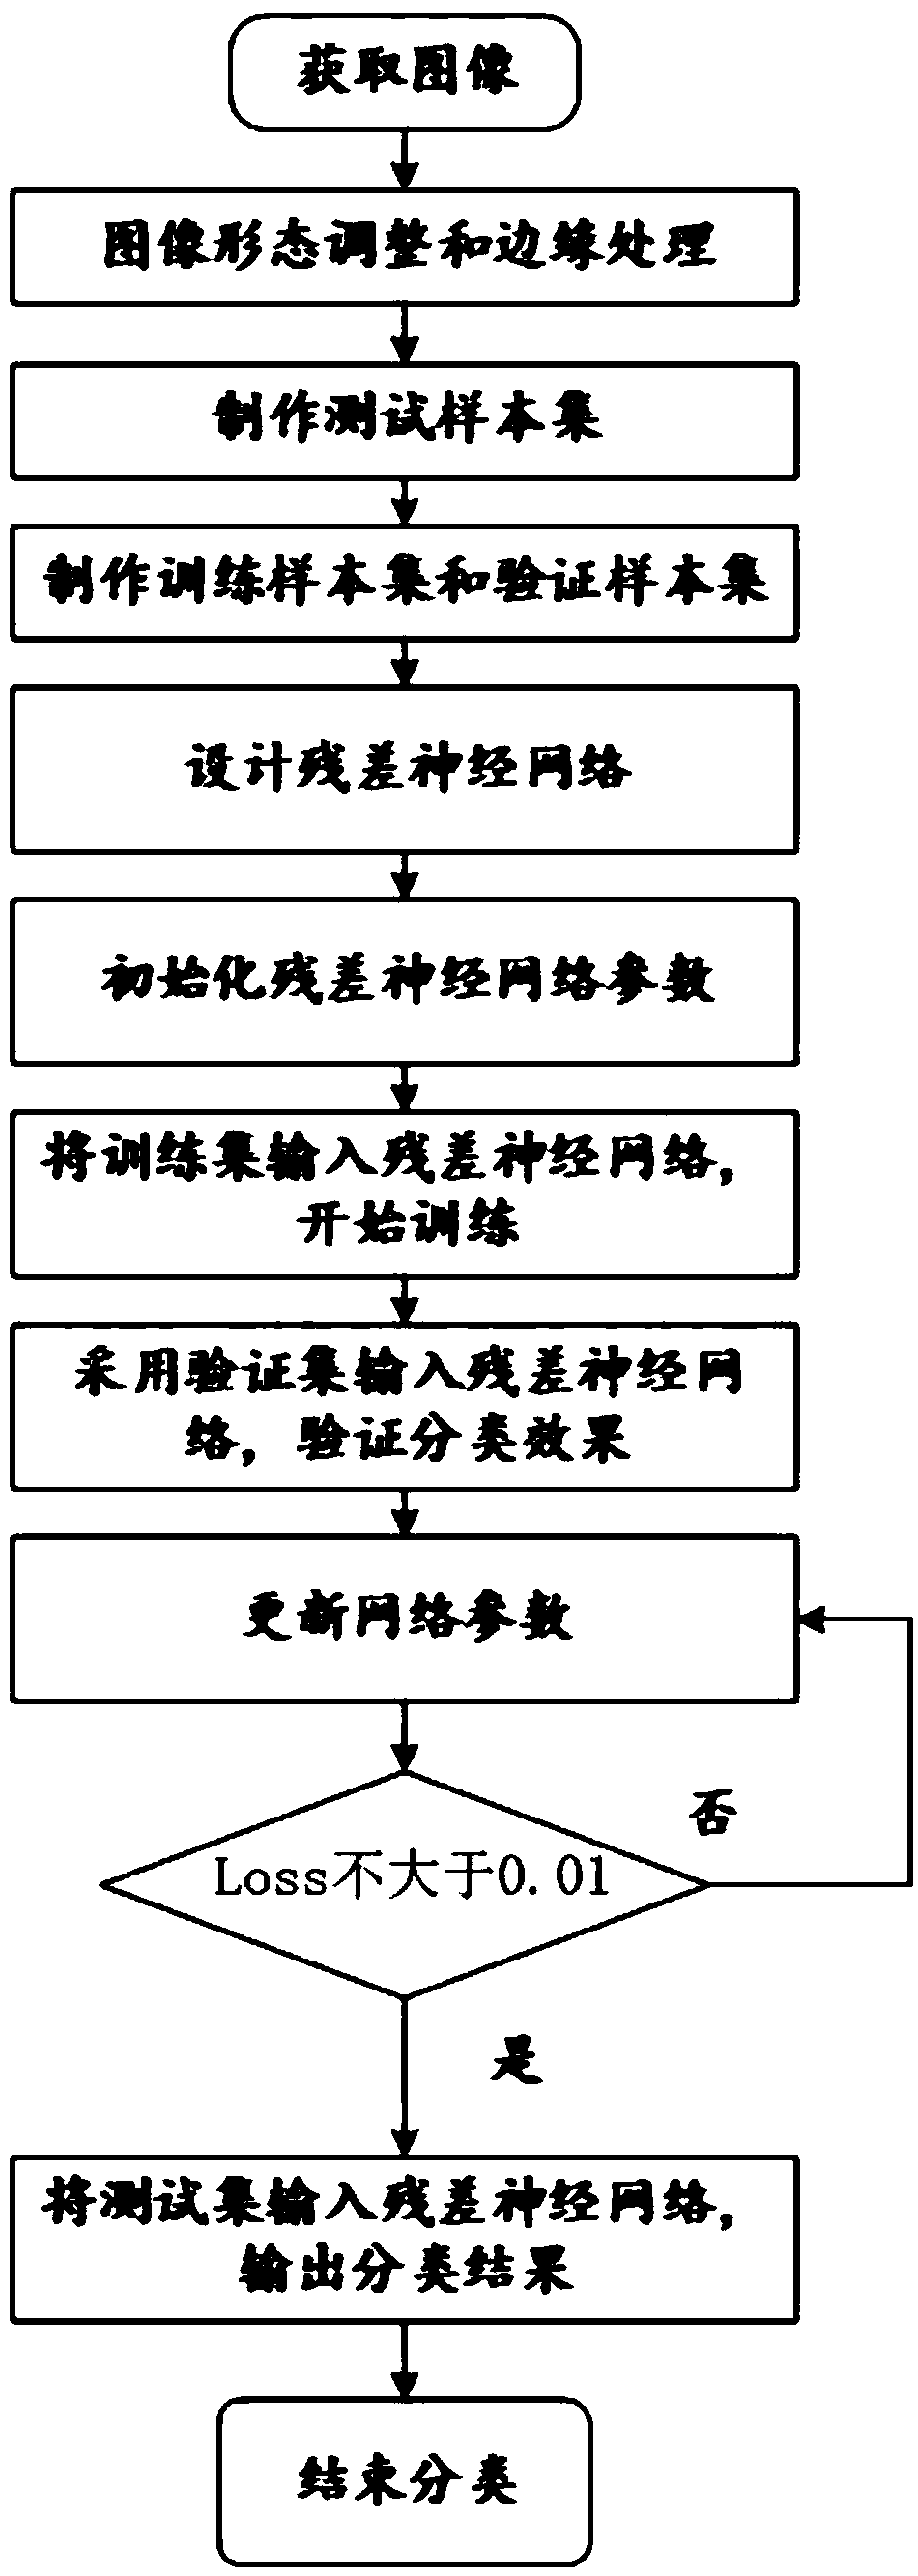 Photovoltaic cell appearance defect classification method based on multi-channel residual neural network